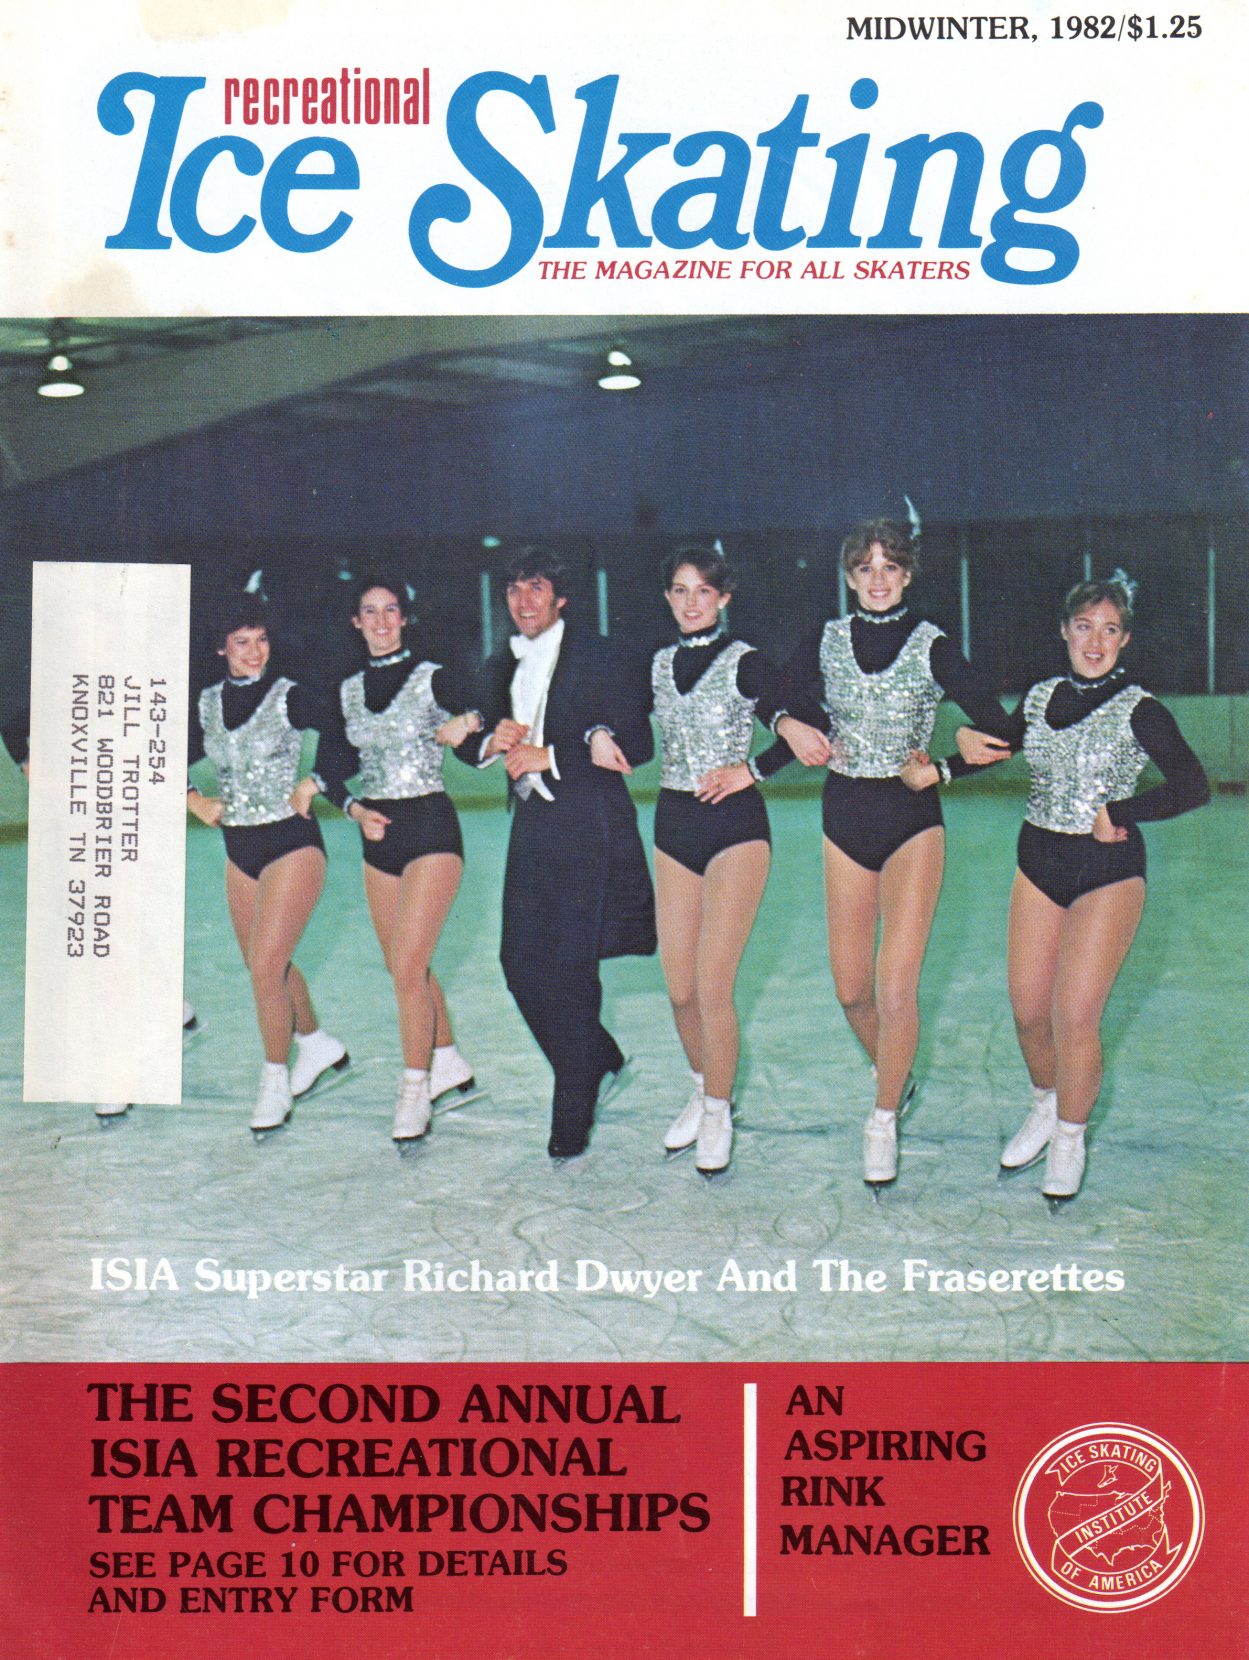 1980s - isi_larry1982cover.jpg